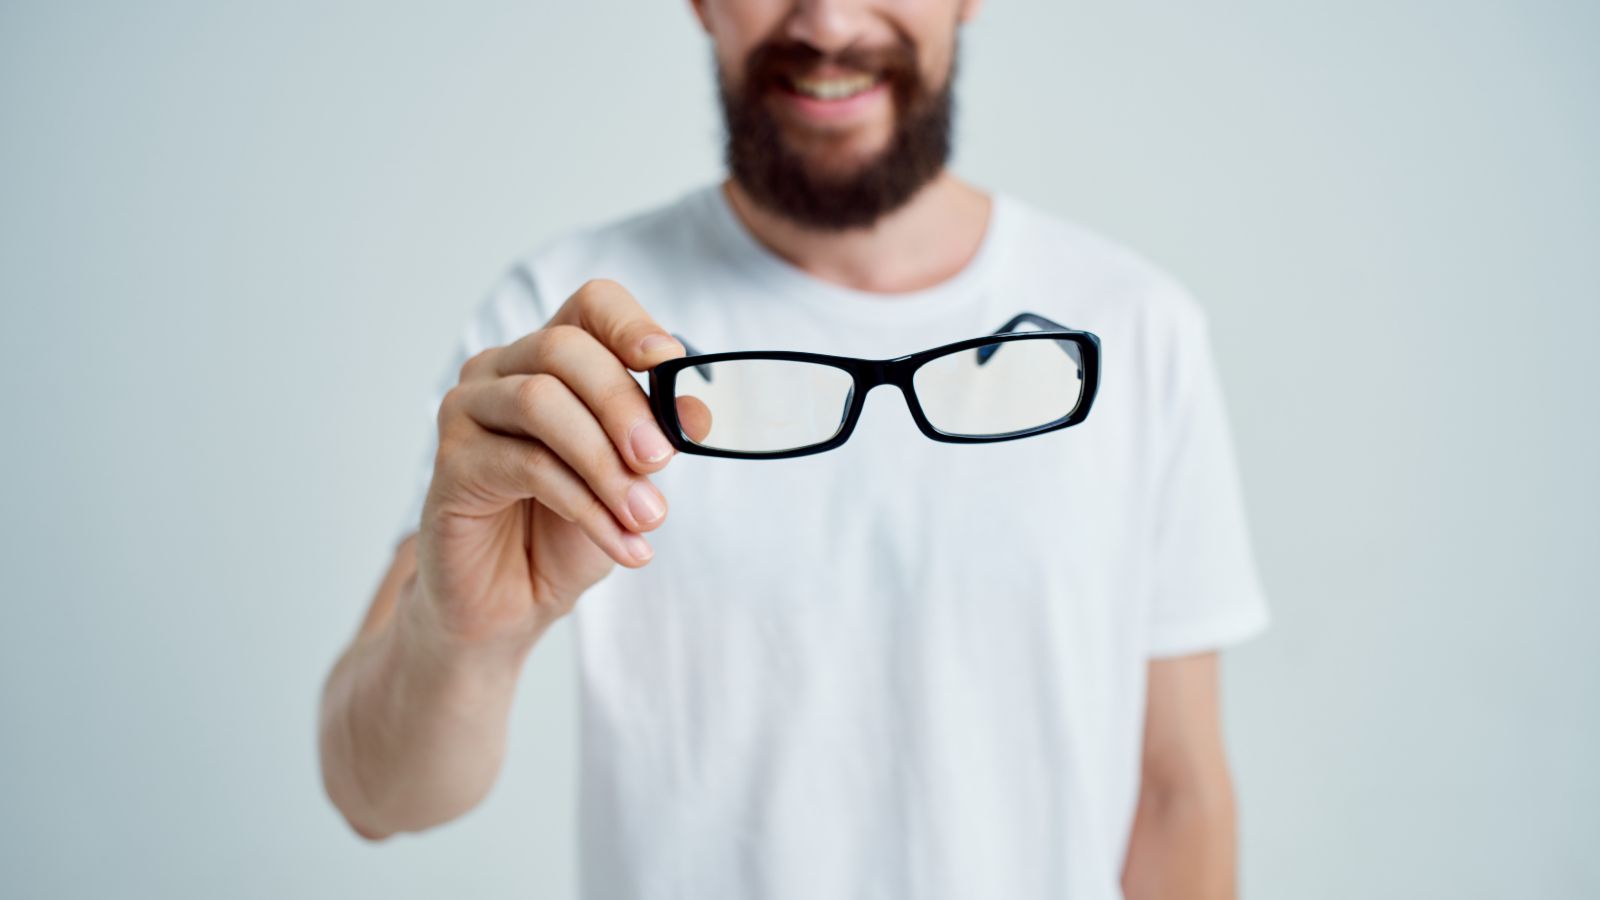 How To Buy Prescription Glasses? Five Tips To Help Out